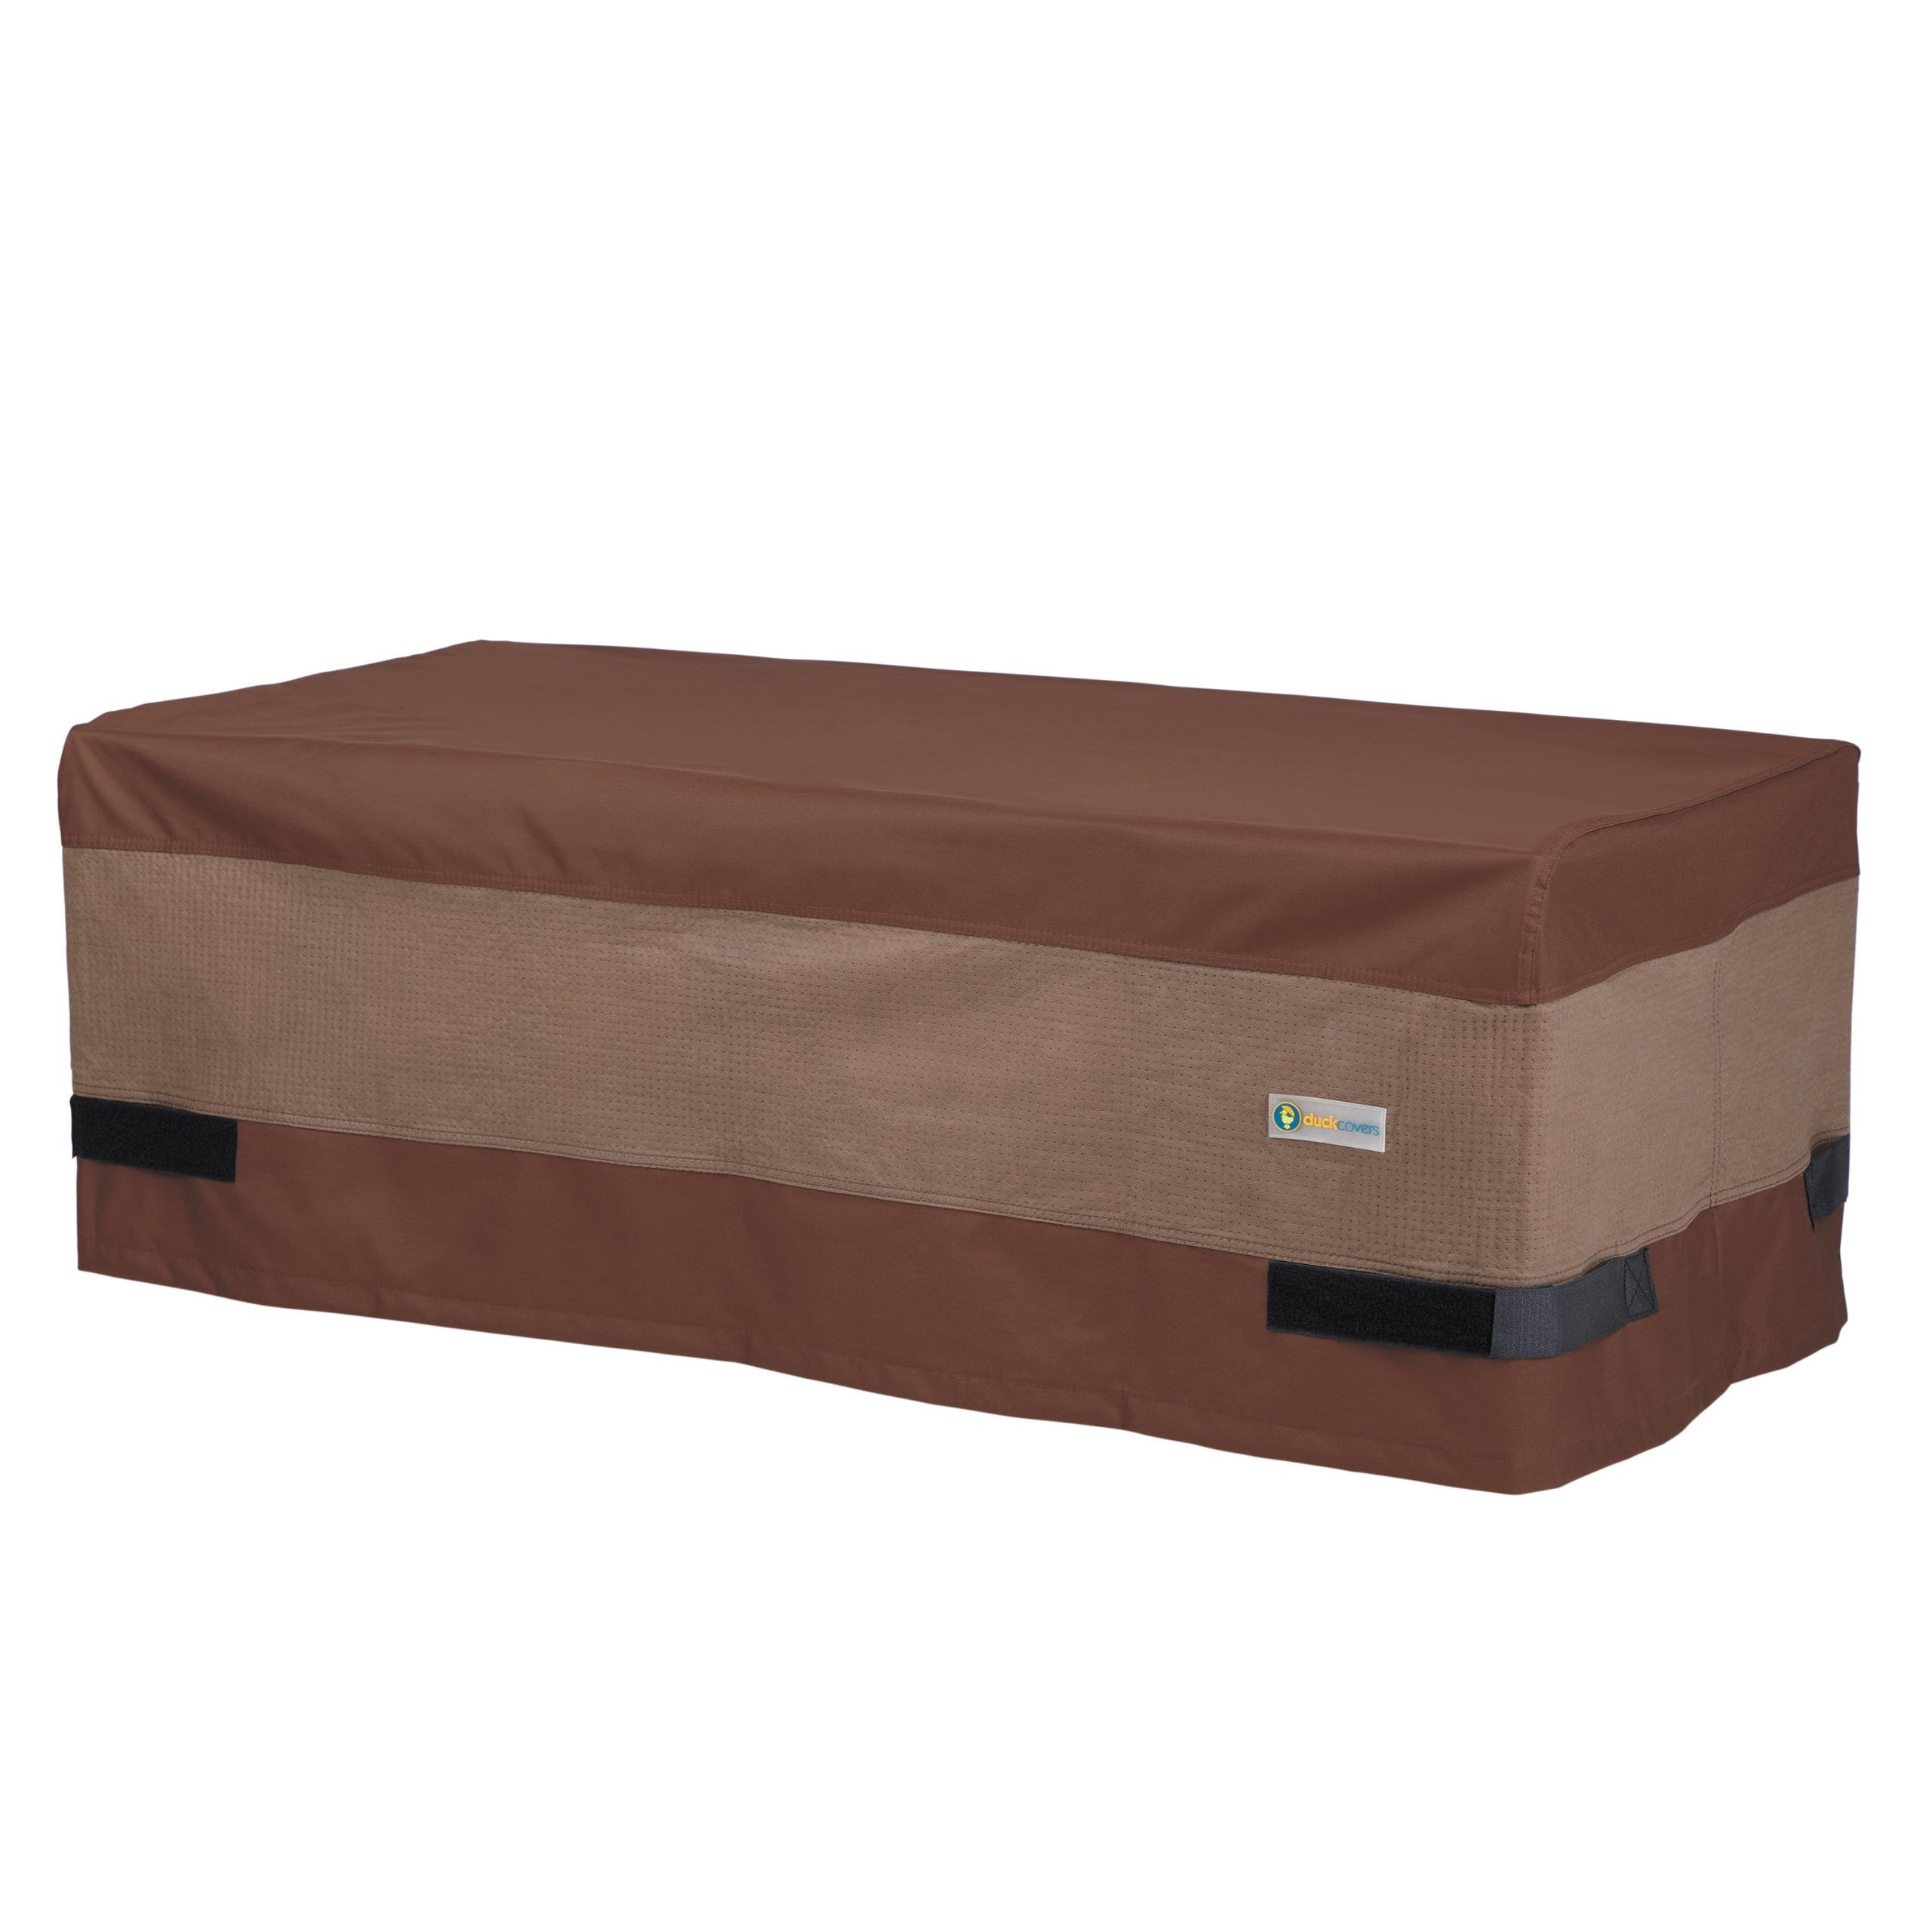 Duck Covers Ultimate Waterproof 47 Inch Rectangular Patio Coffee Table Pertaining To Waterproof Coffee Tables (View 12 of 15)